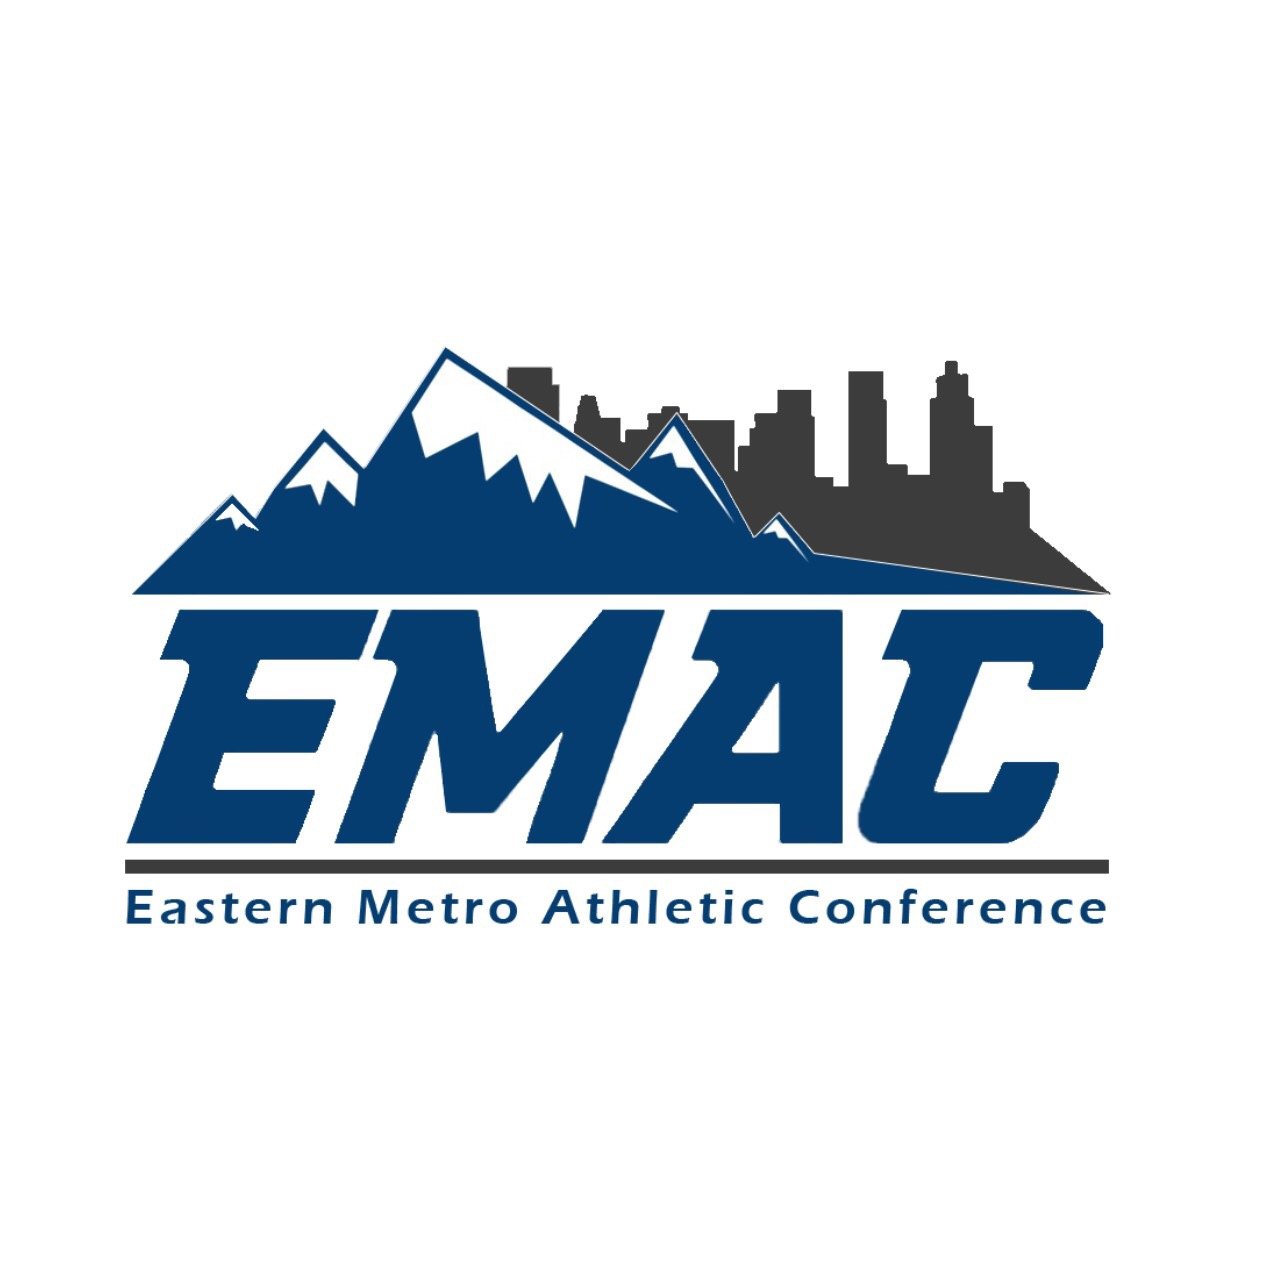 The official Twitter account of the Eastern Metro Athletic Conference.